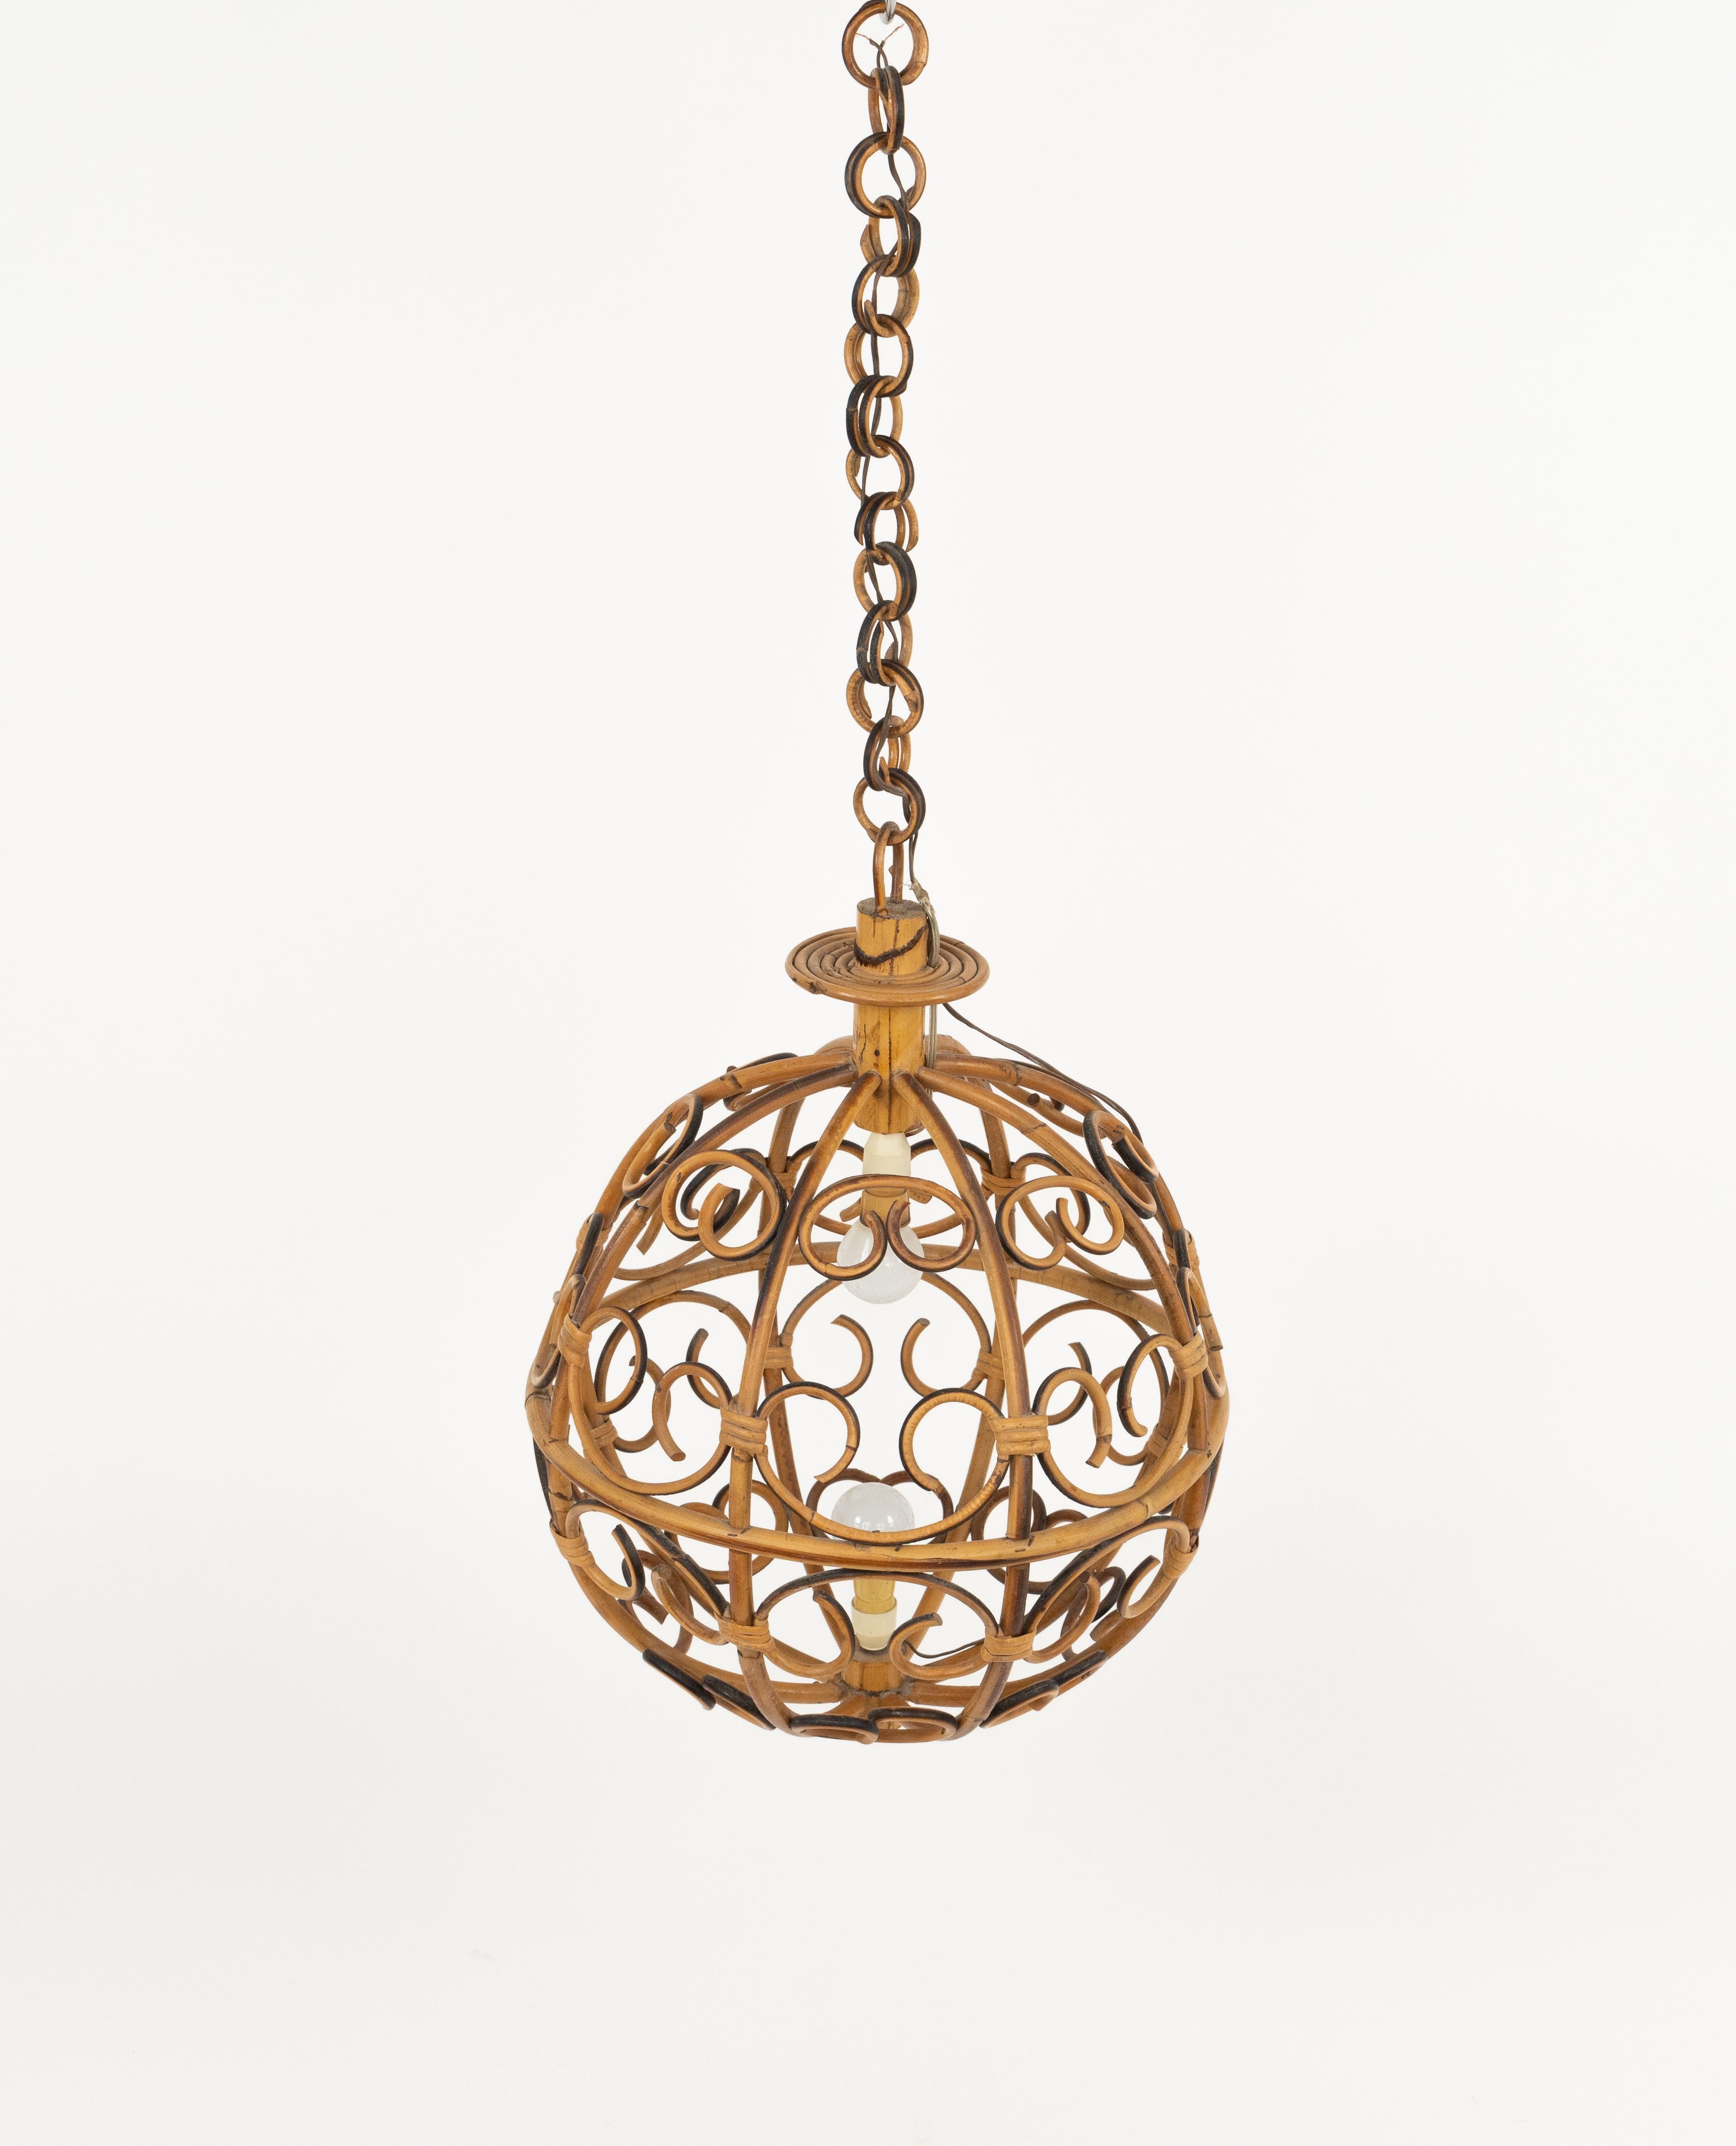 Midcentury Globe Chandelier in Rattan and Bamboo, Italy 1960s For Sale 2